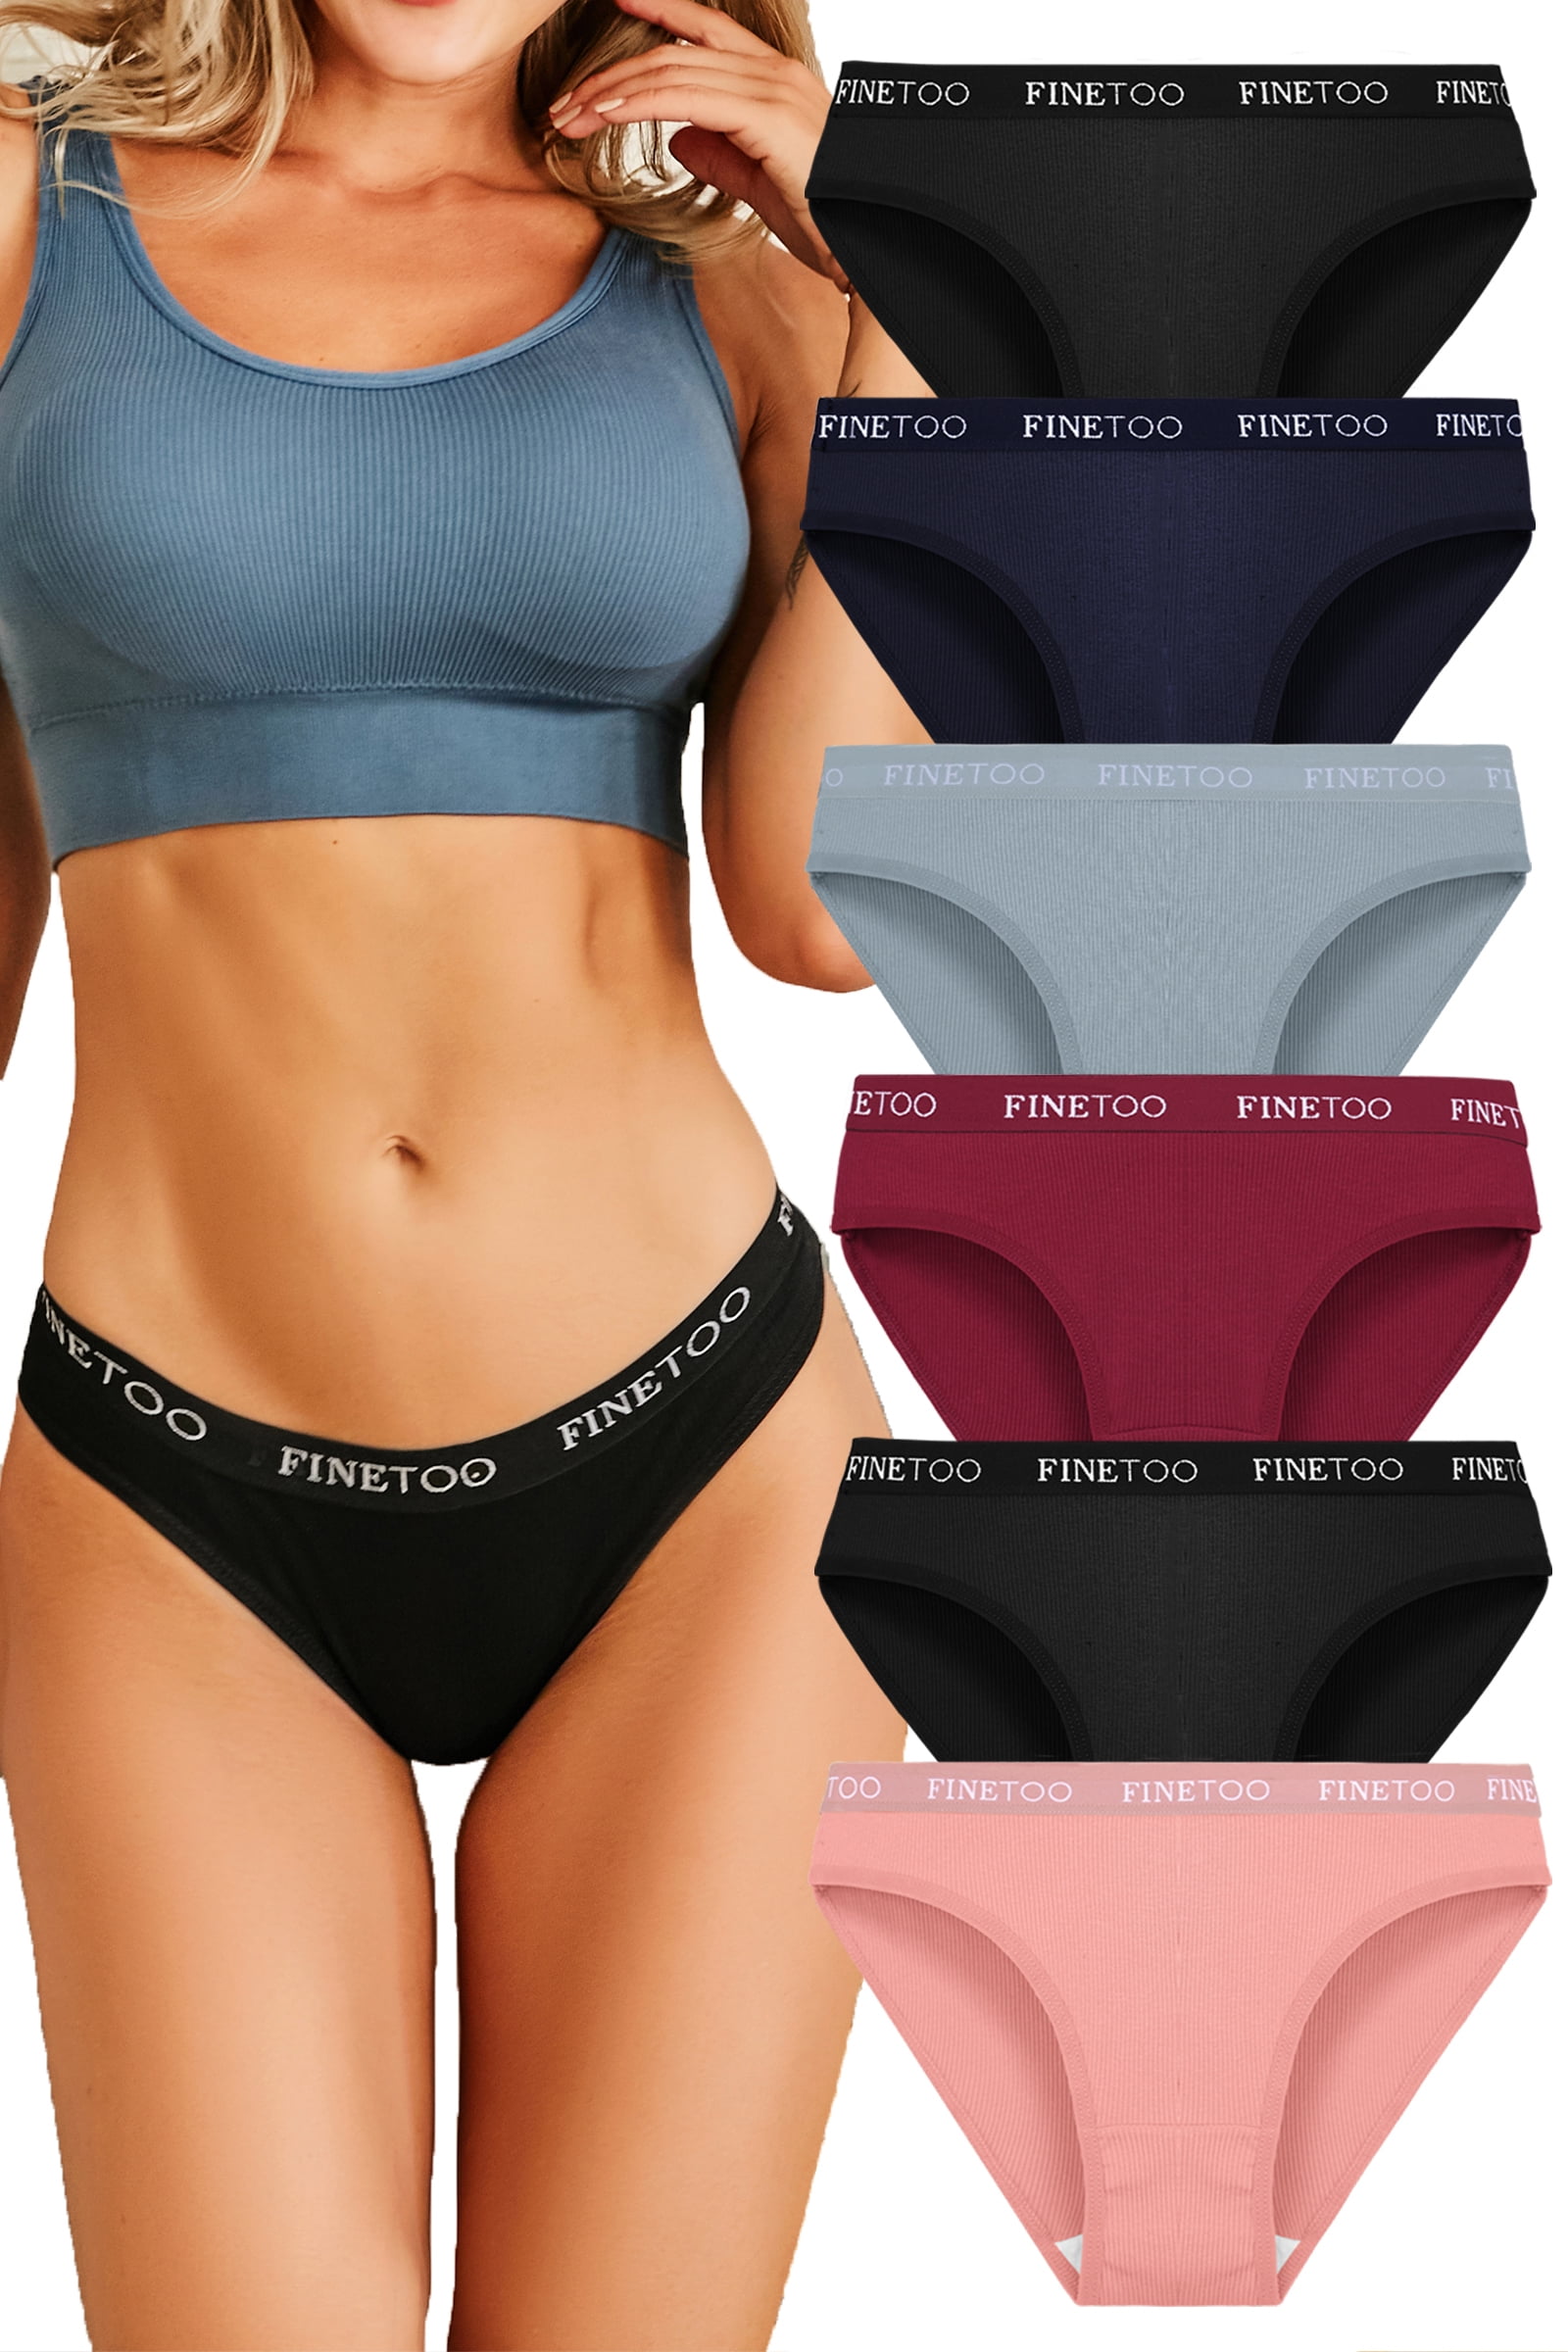 FINETOO 6 Pack Cotton Underwear For Women Cheeky Panties Low Rise Bikini  Hipster Breathable Stretch S-XL